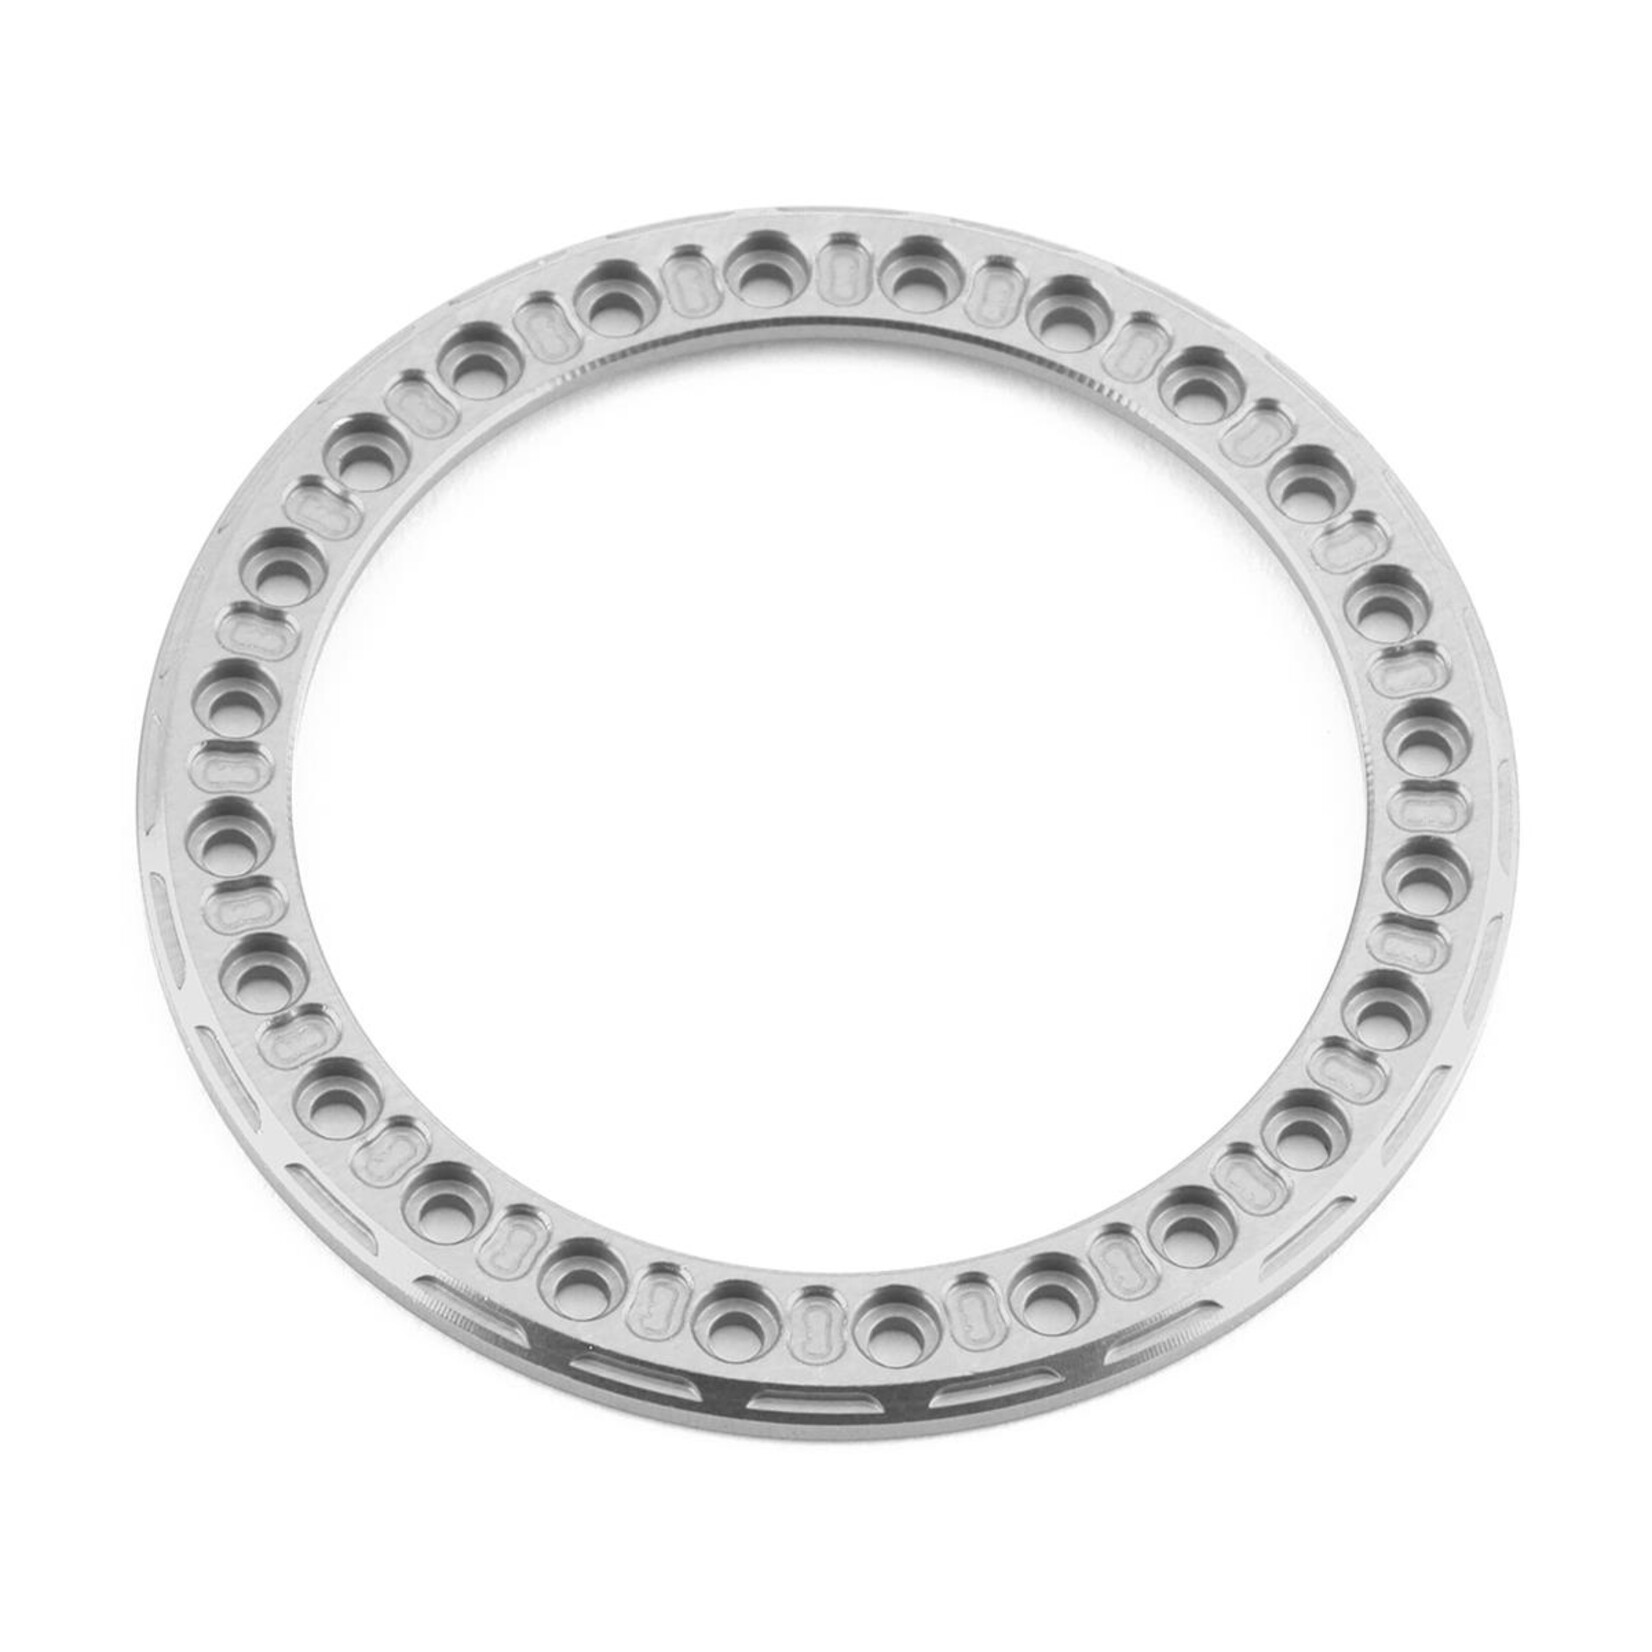 Vanquish Products Vanquish Products 1.9" IFR Skarn Beadlock Ring (Silver) #VPS05441